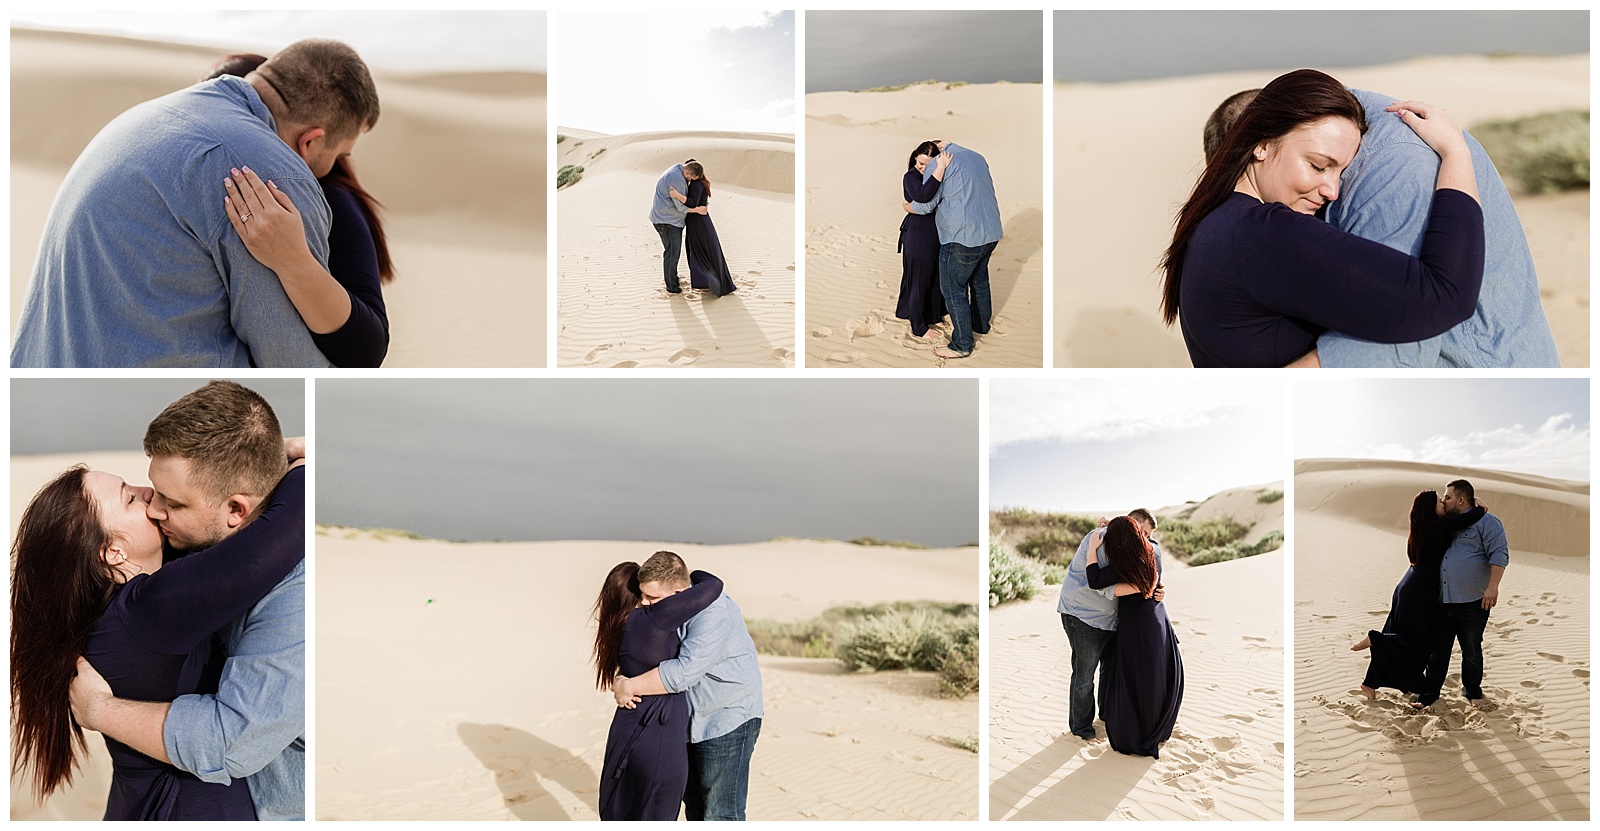 intimate moments between an engaged couple dancing on the dunes